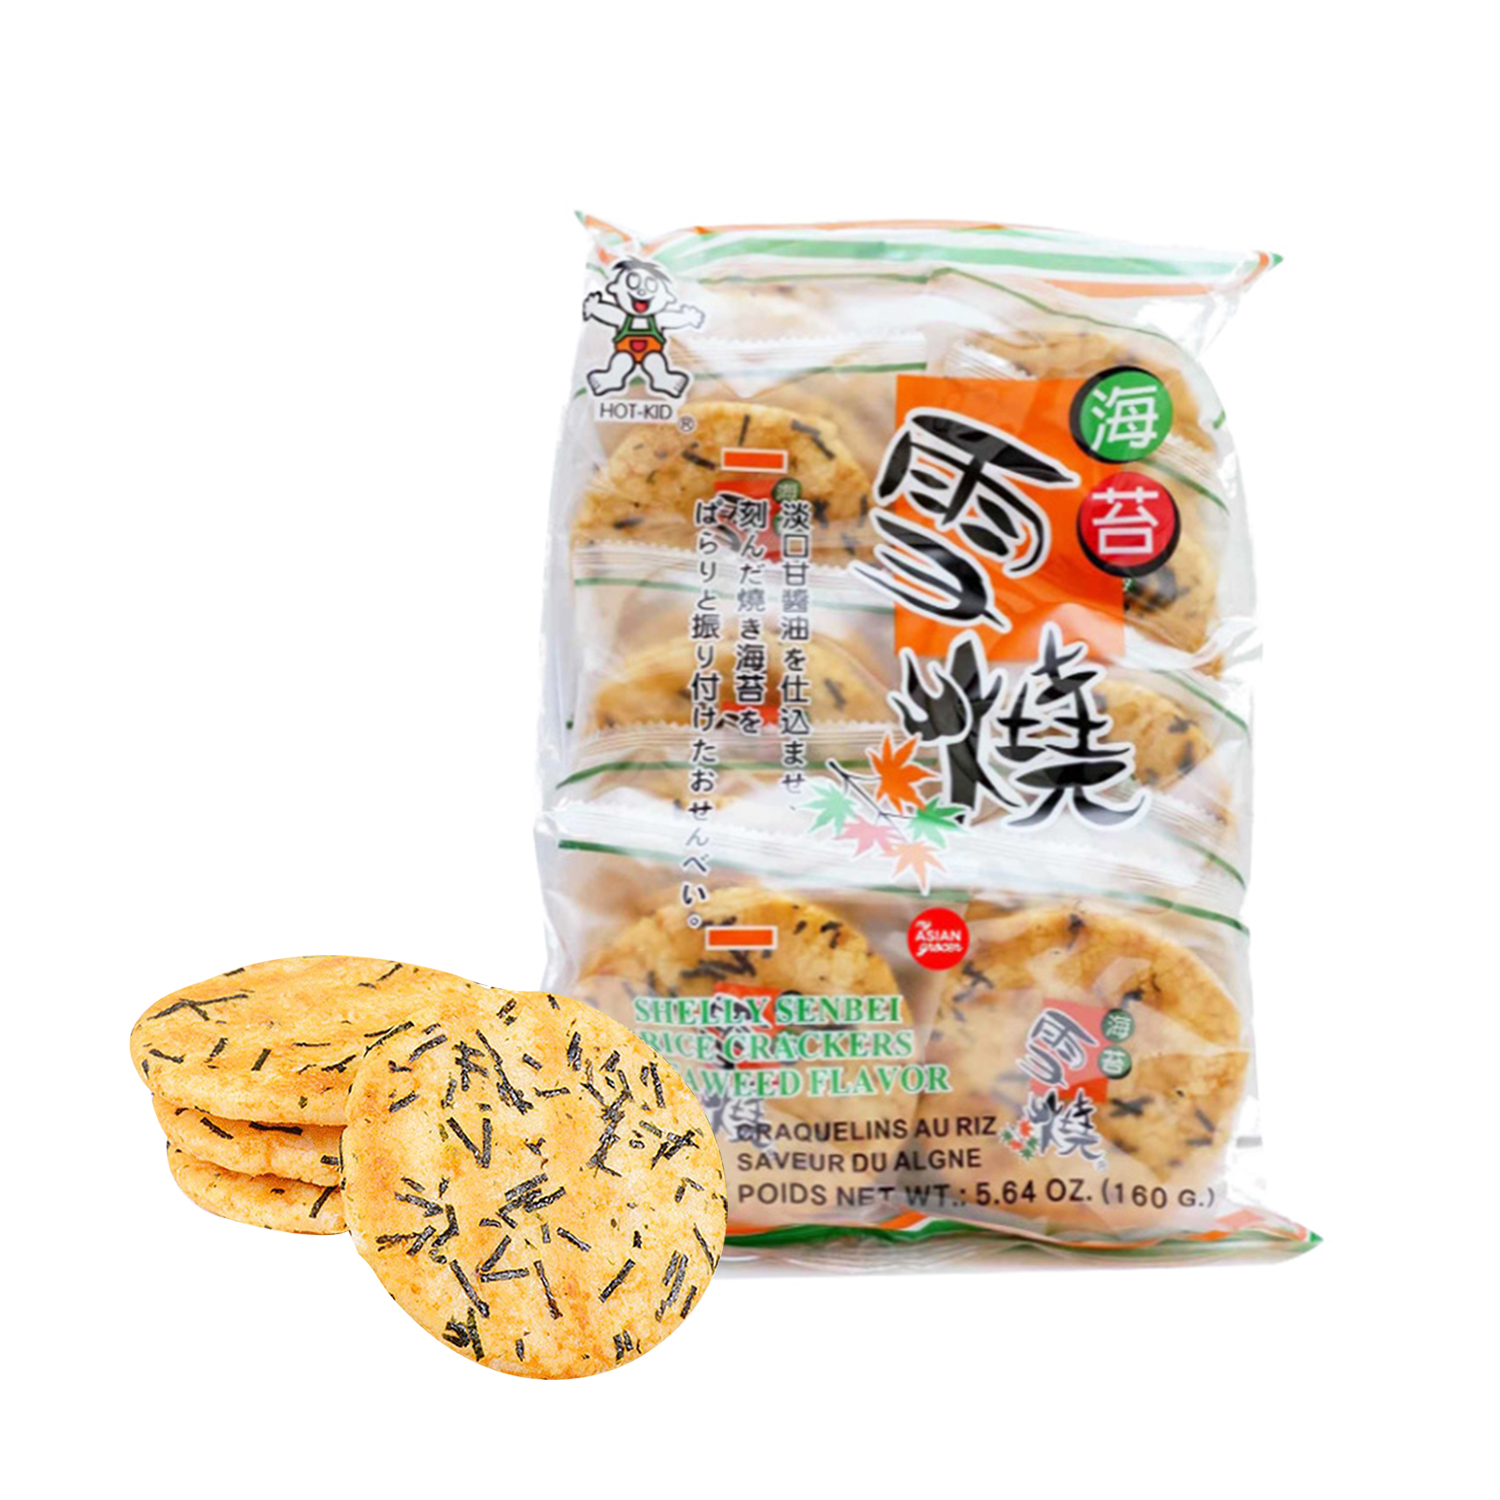 Hot Kids Want Want Shelly Senbei Rice Crackers Seaweed Flavour 160g-eBest-Biscuits,Snacks & Confectionery